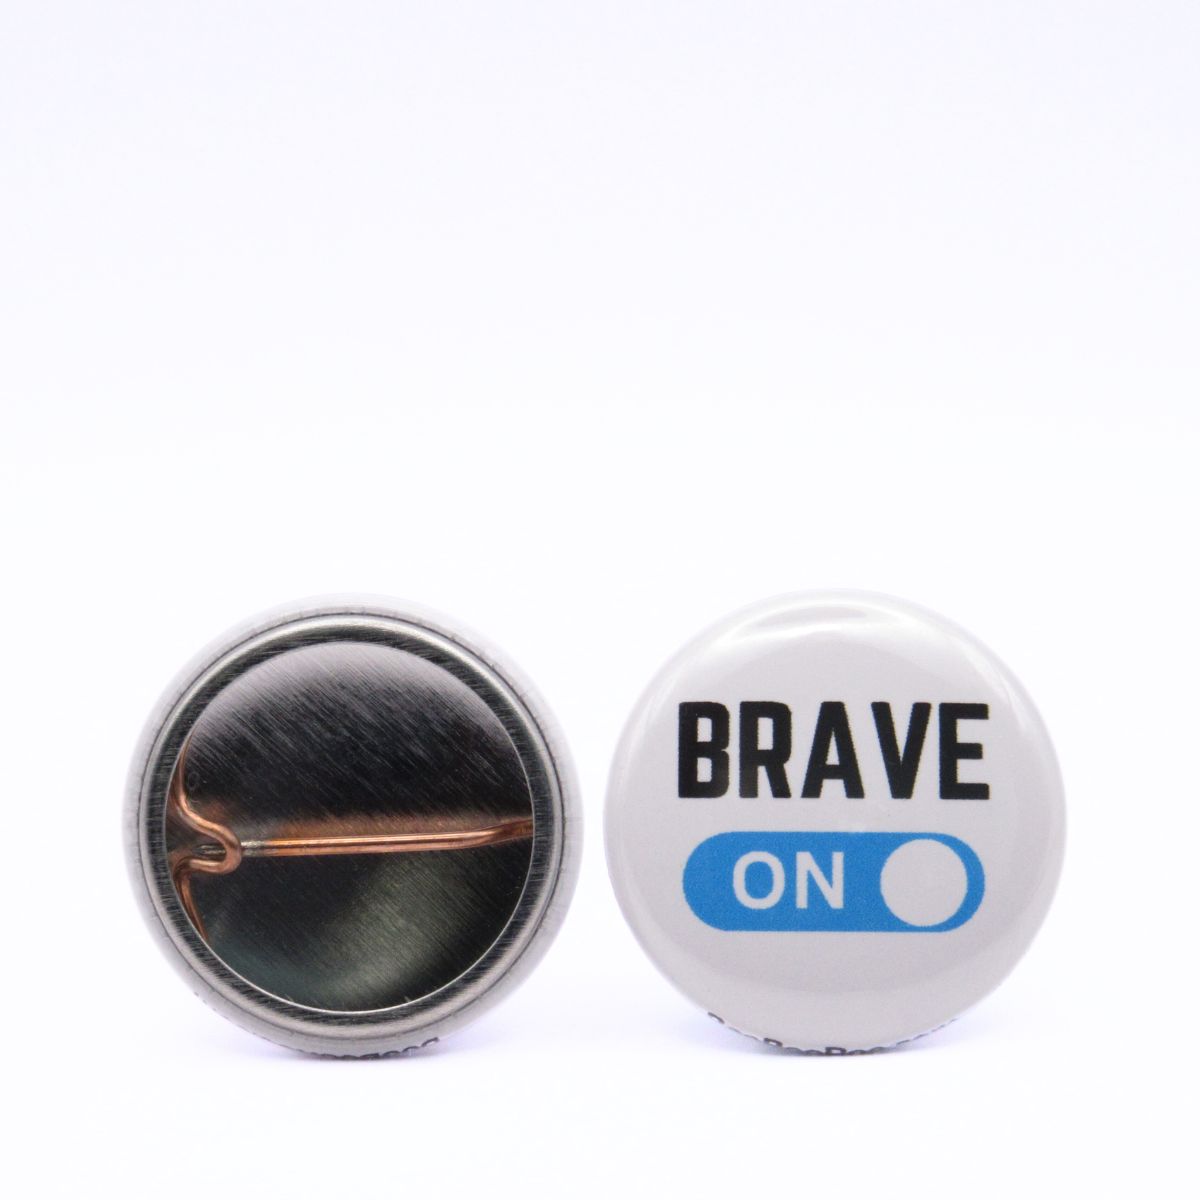 BooBooRoo Pinback Button (i.e. button, badge, pin) displaying brave mode is on. Image showing front and back of high-quality metal button.